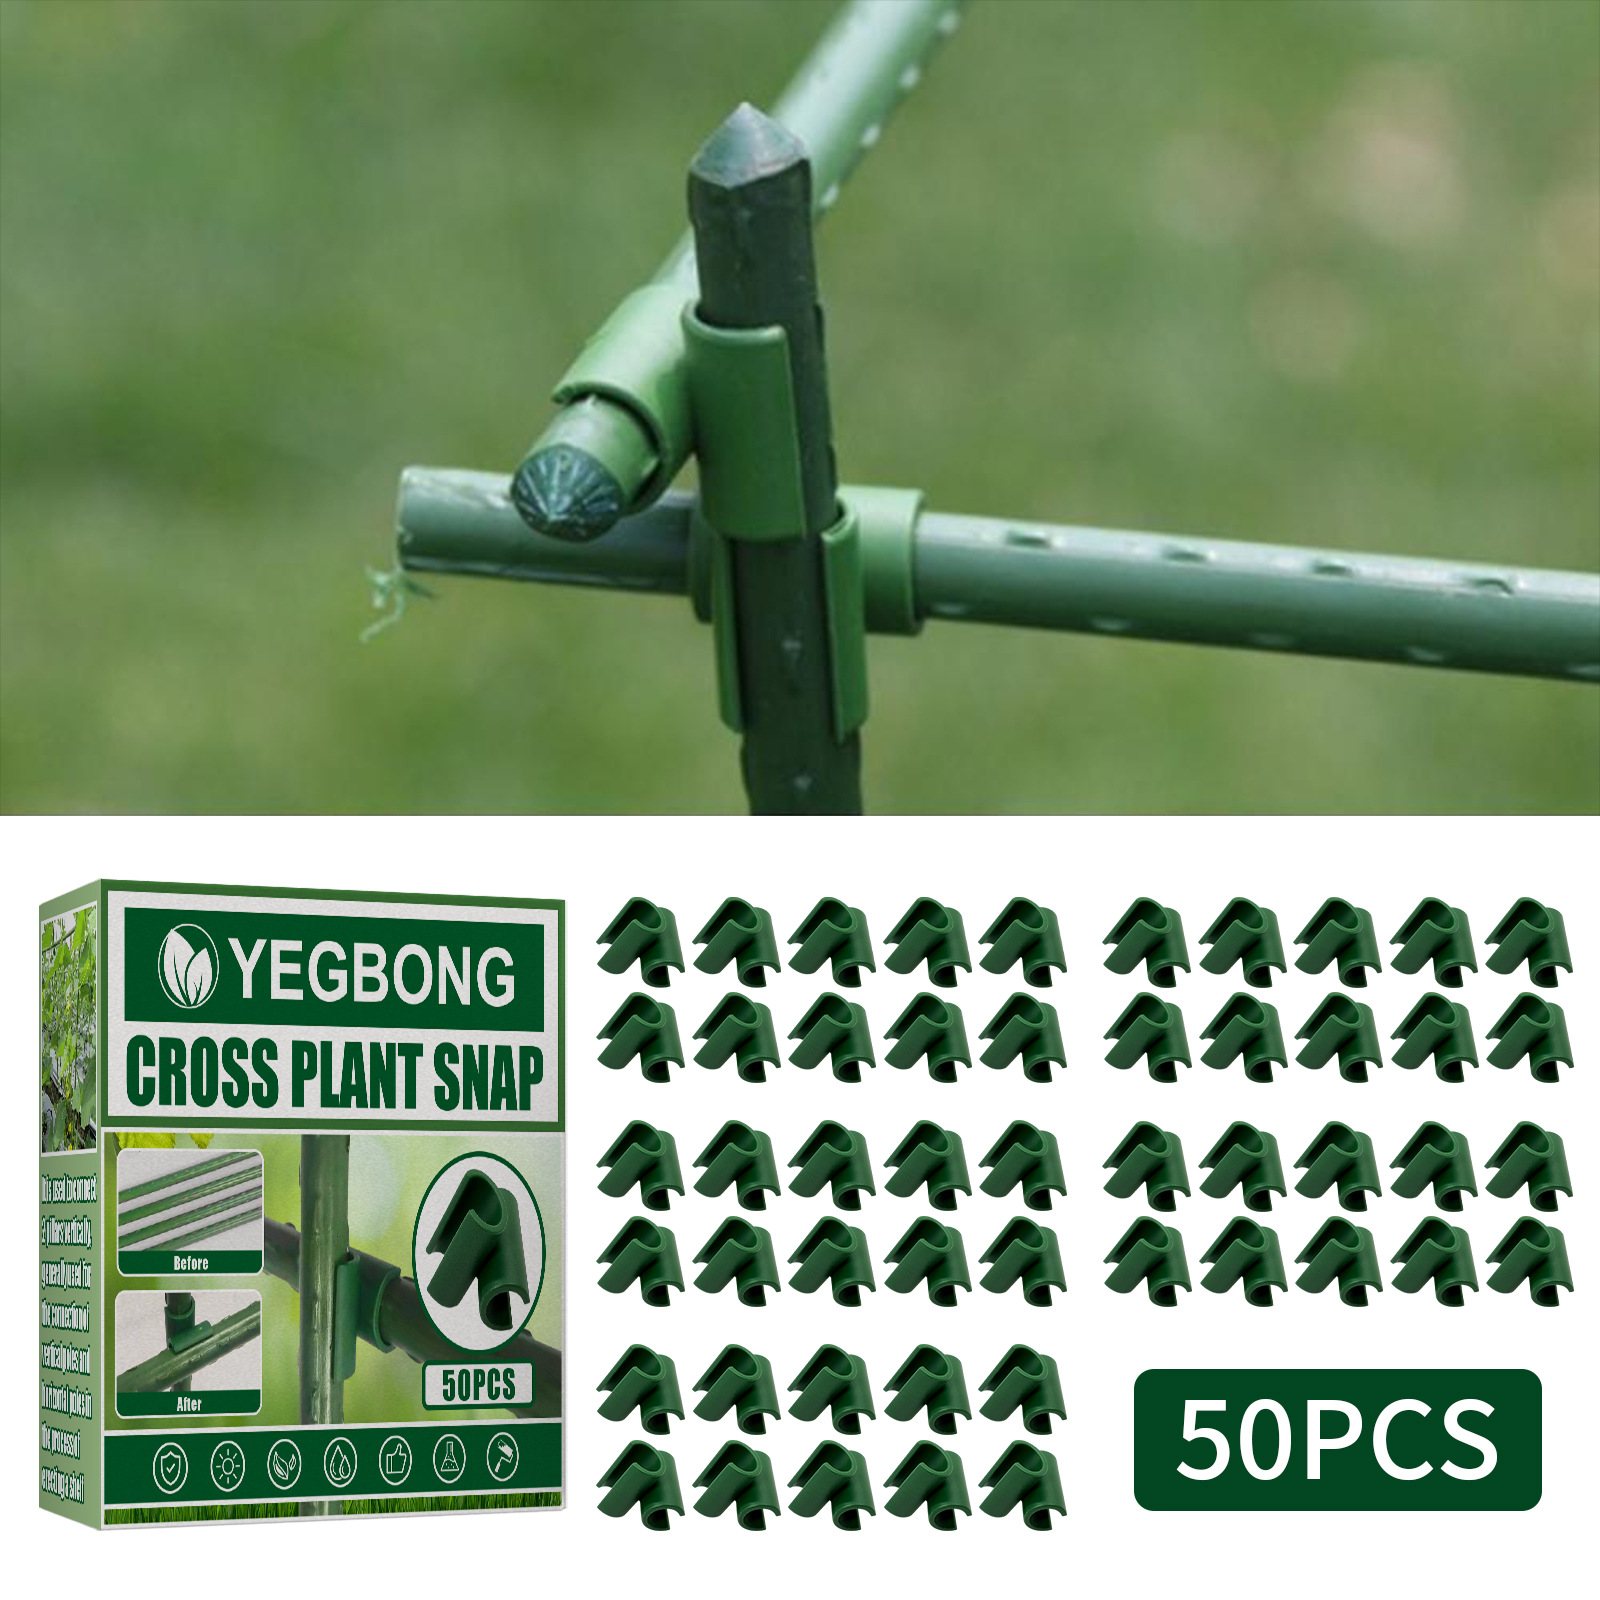 

50pcs Plastic Cross Buckle, Garden Plant Support Clips (0.31''x0.78''), Gardening Accessories For Greenhouse, Vine Climbing Rack, Firm & Durable